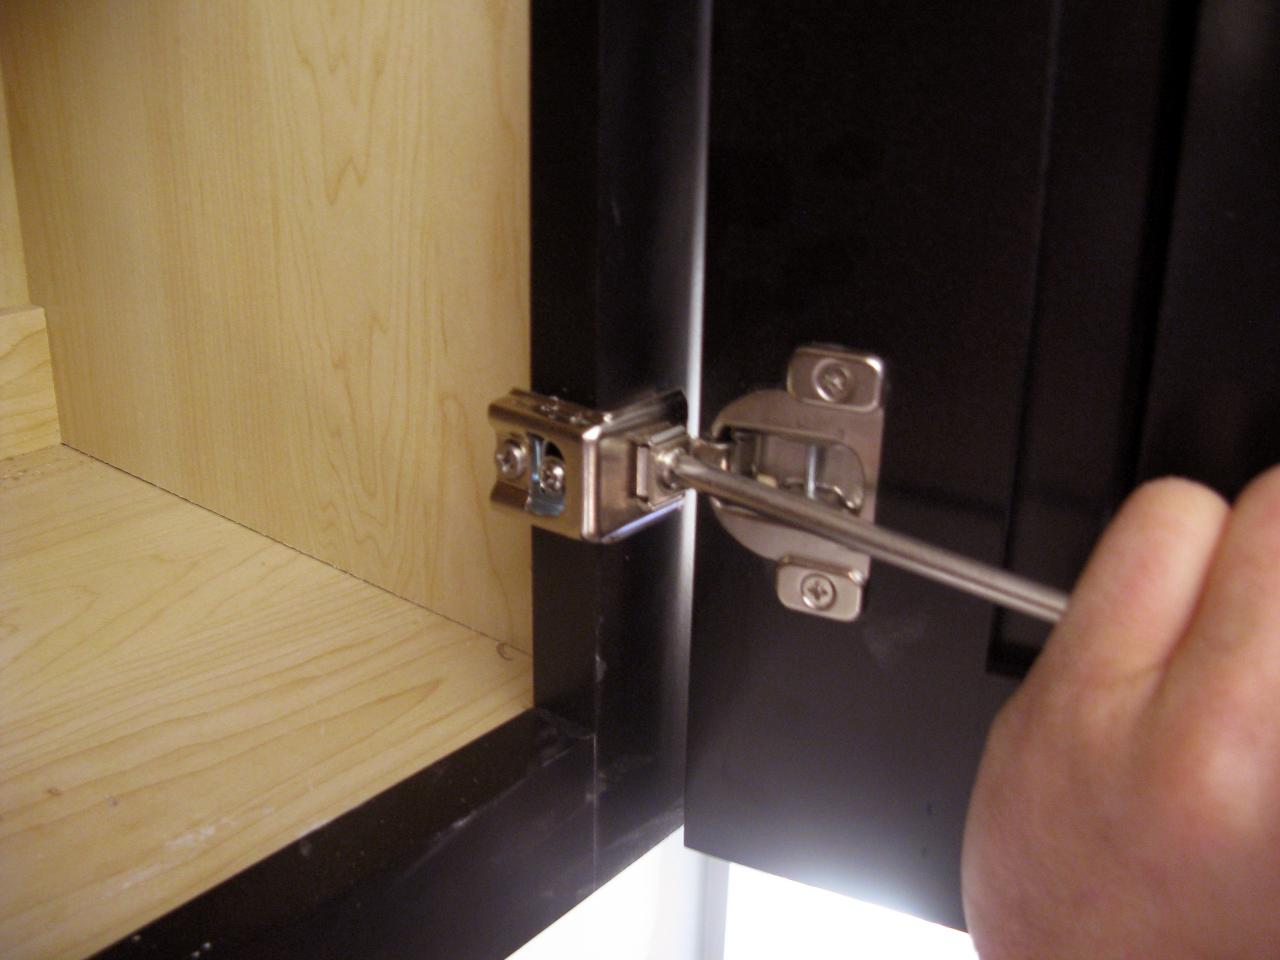 How To Install And Level Cabinet Doors, How To Put A Cabinet Door Back On Its Hinges